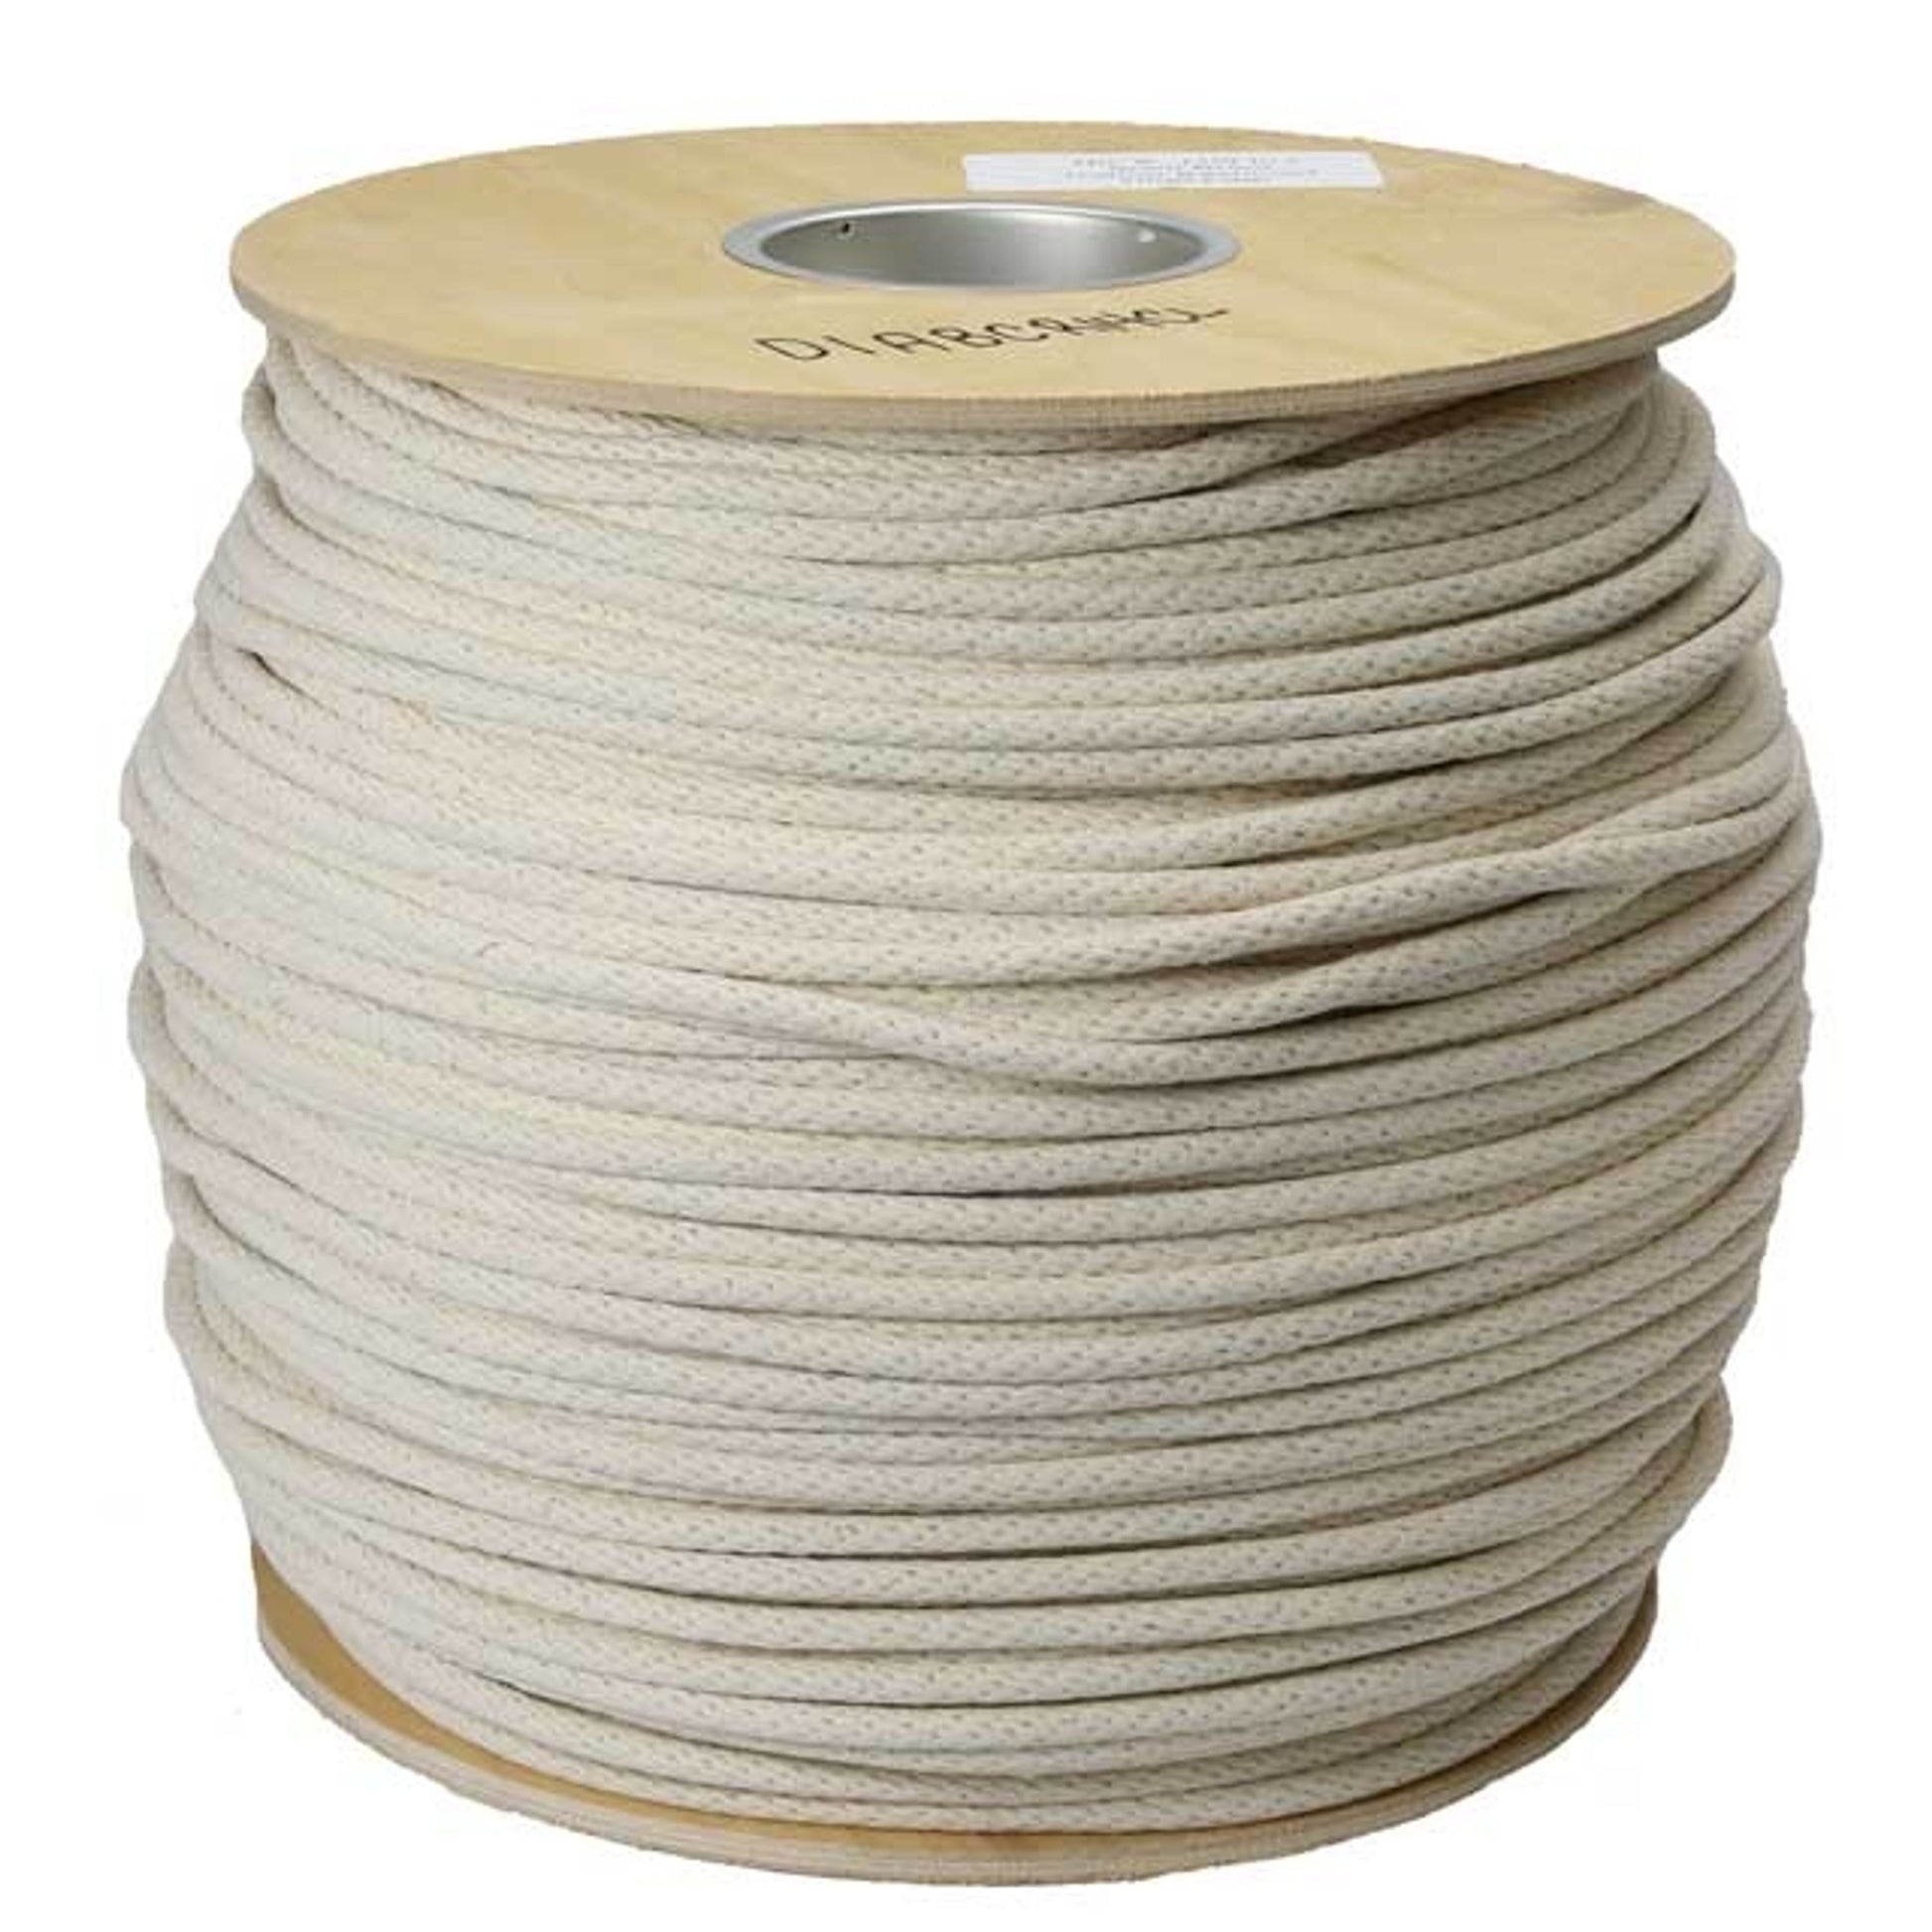 Twisted cotton rope 4mm - Pure White